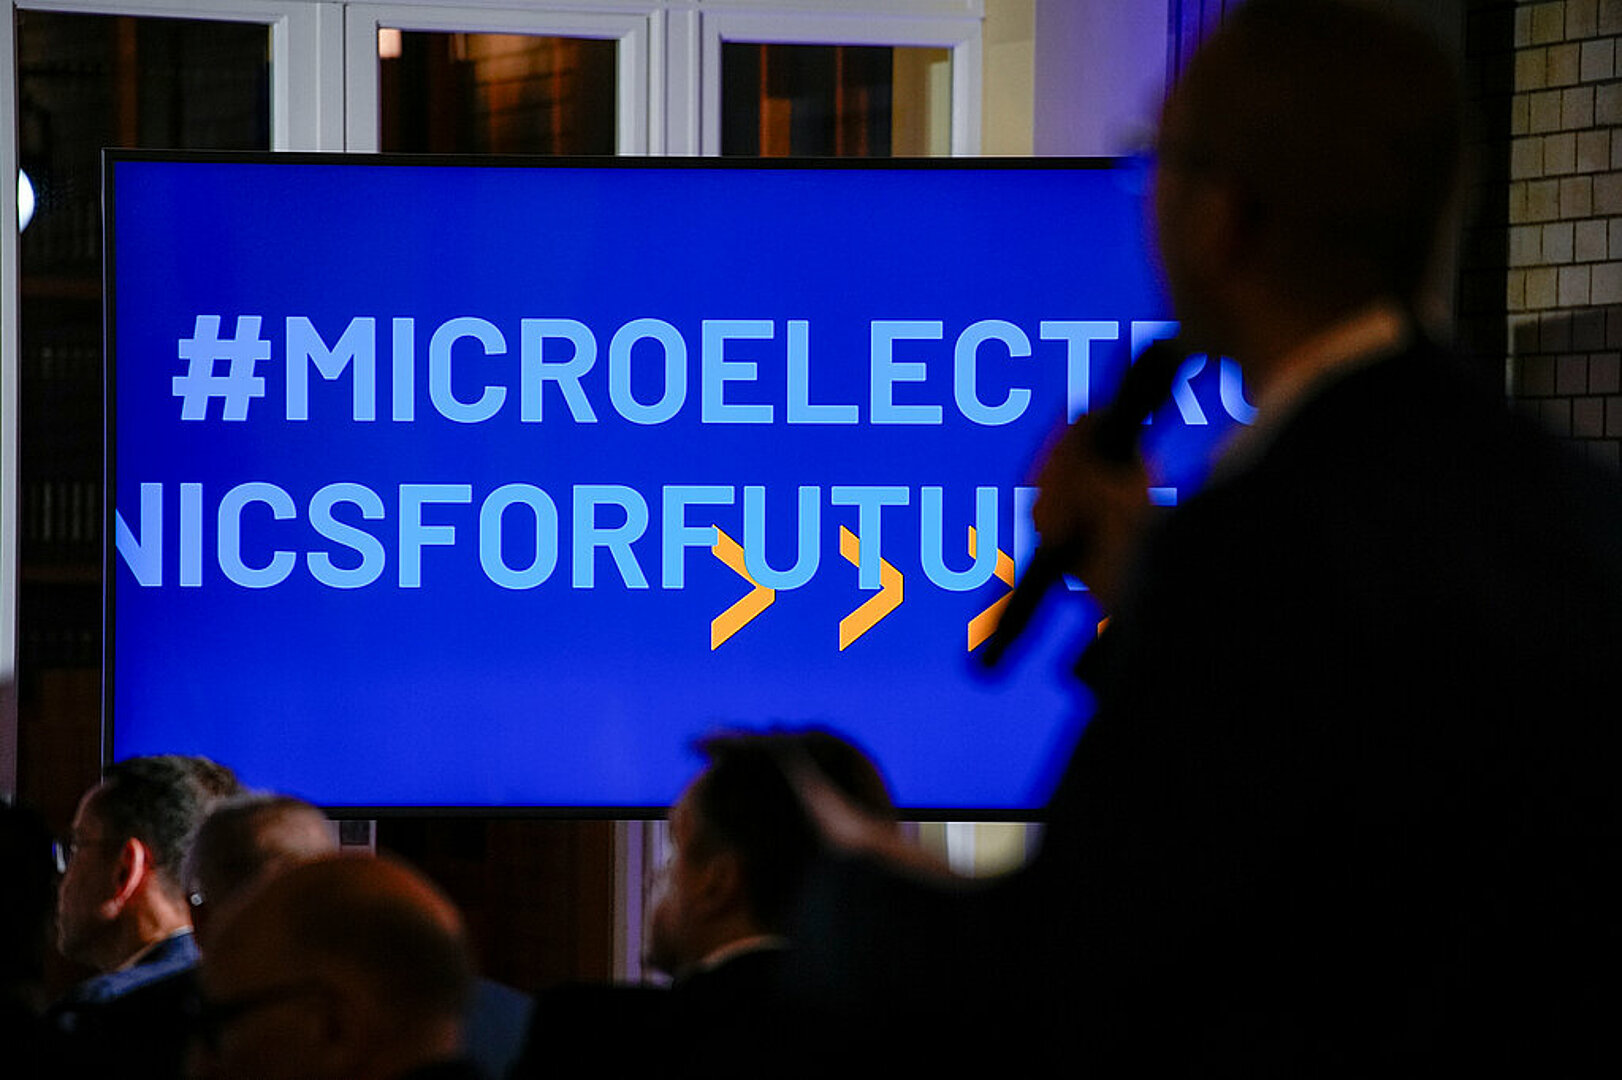 Microelectronics for Future